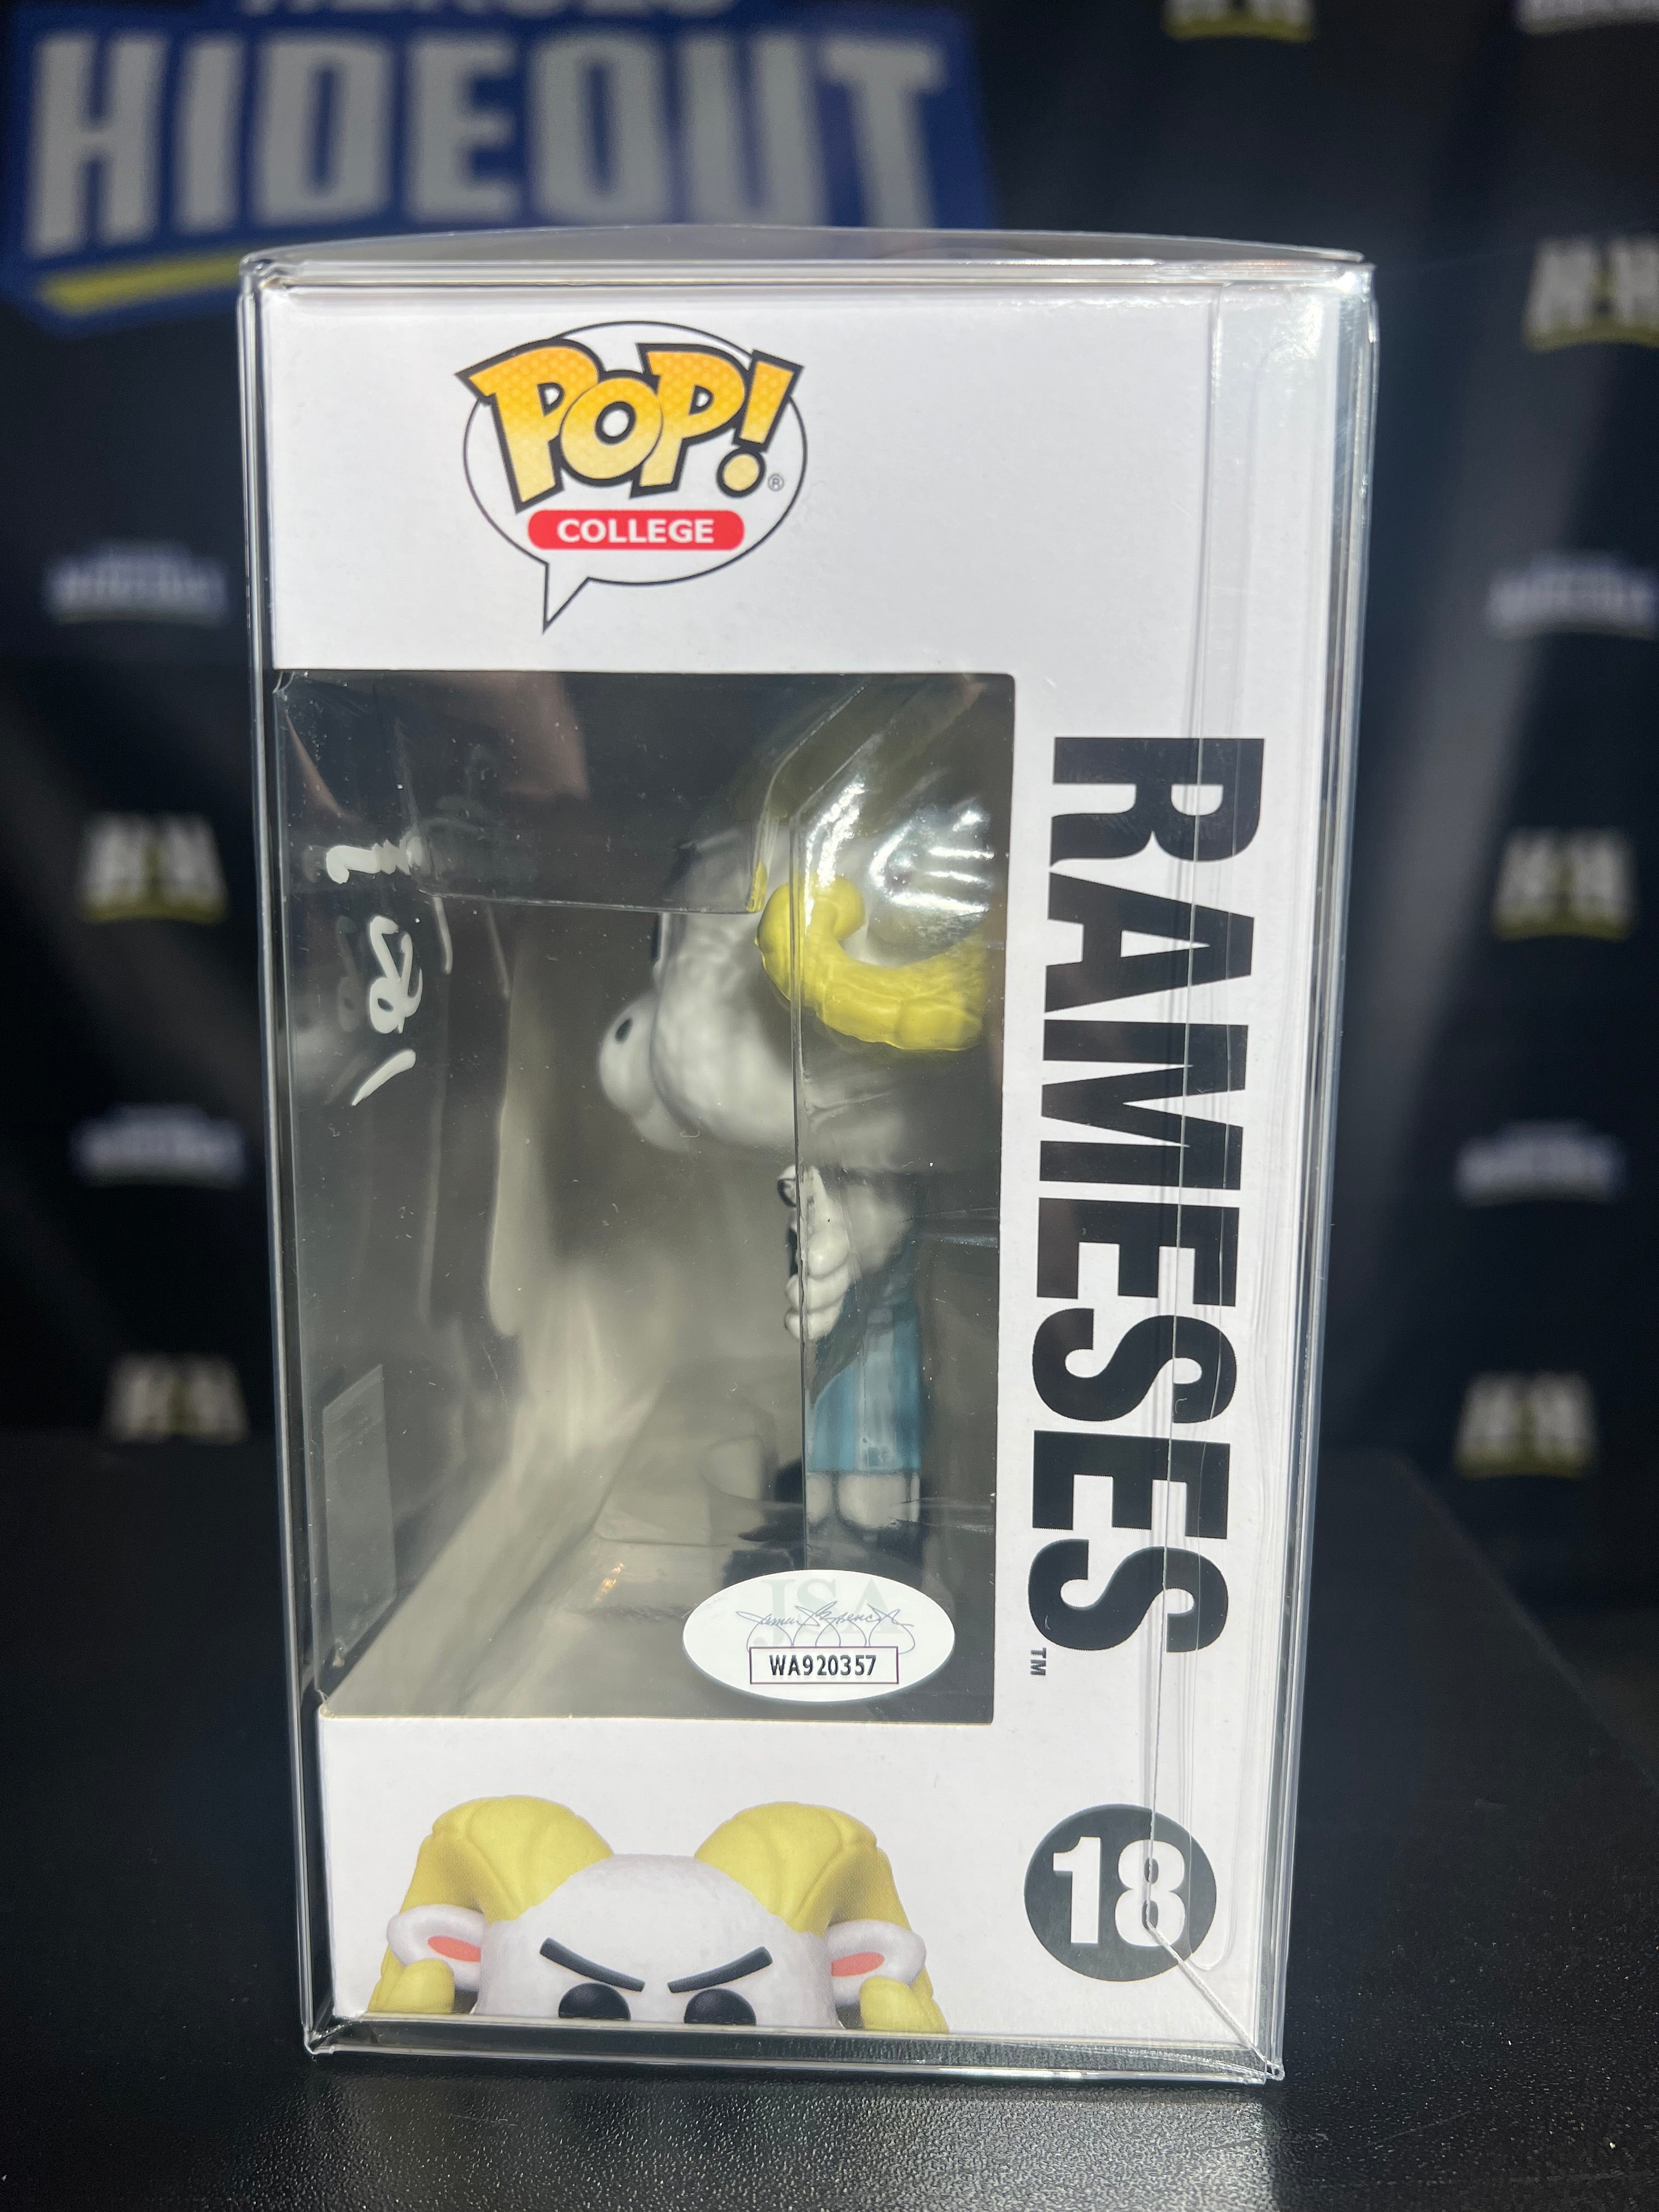 Rameses 18 Signed by Lawrence Taylor JSA Certified